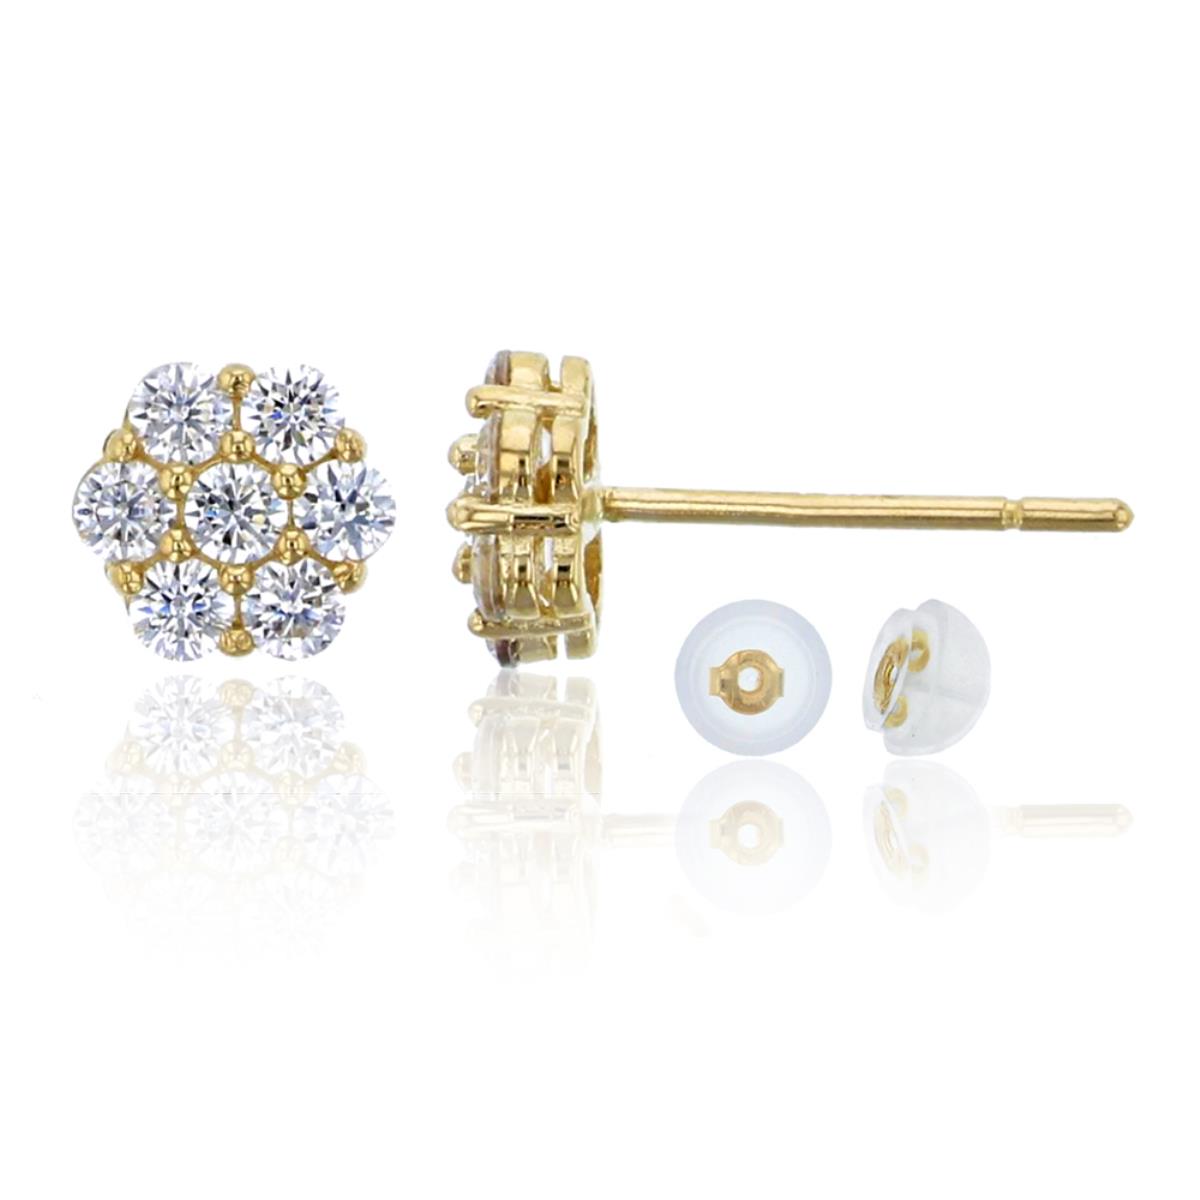 10K Yellow Gold Pave 5mm Cluster CZ Stud Earring & 10K Silicone Back